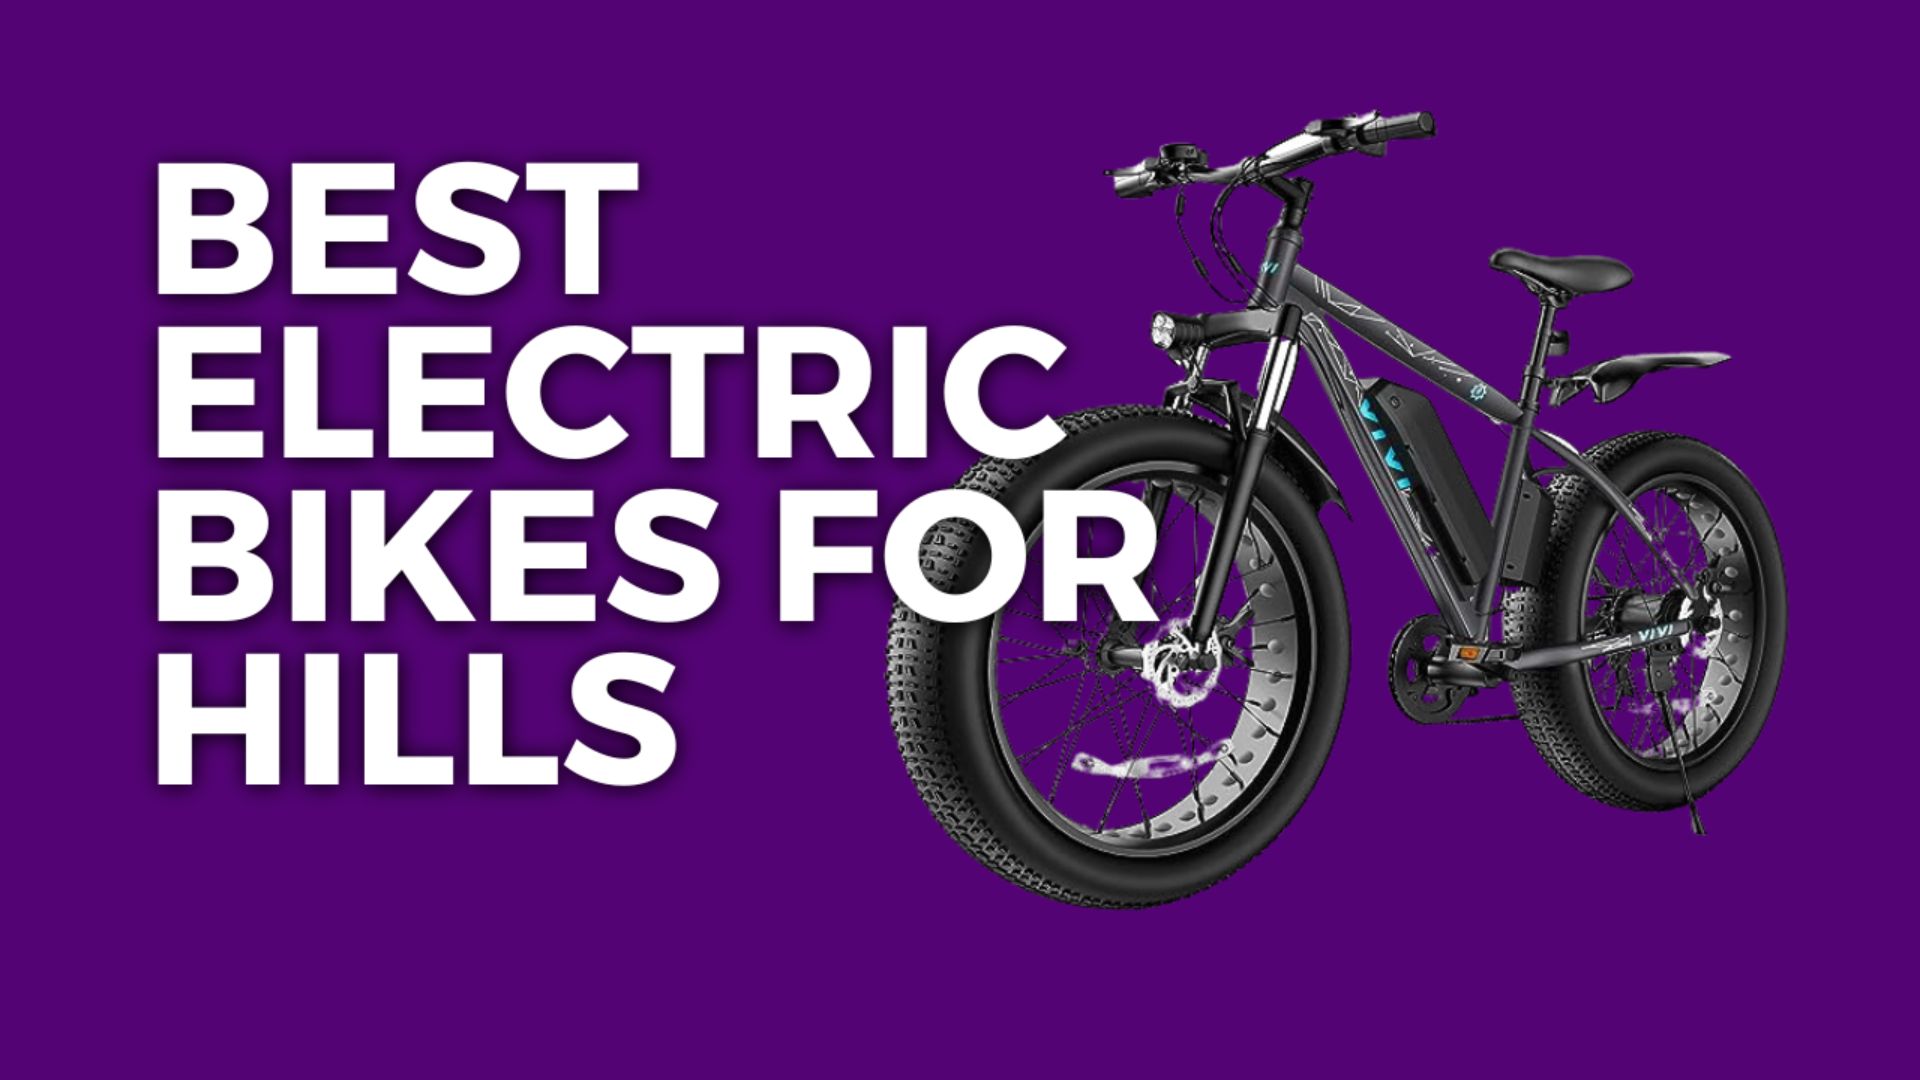 Best Electric Bikes For Hills